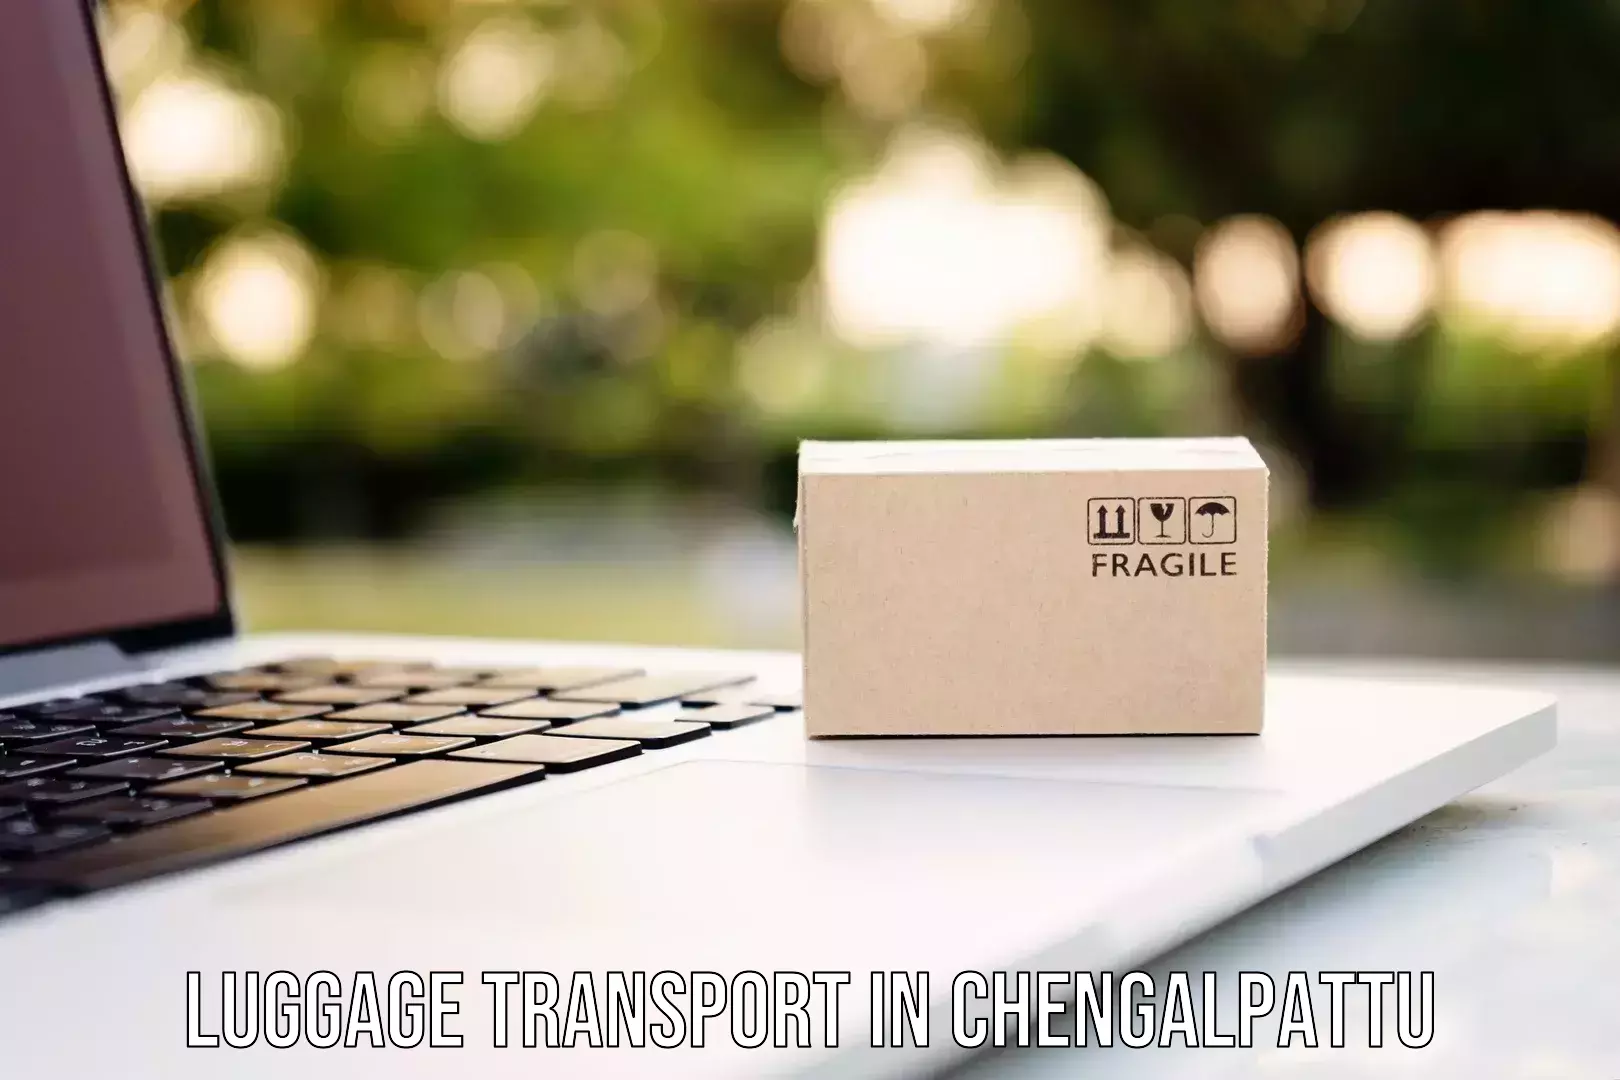 Baggage transport services in Chengalpattu